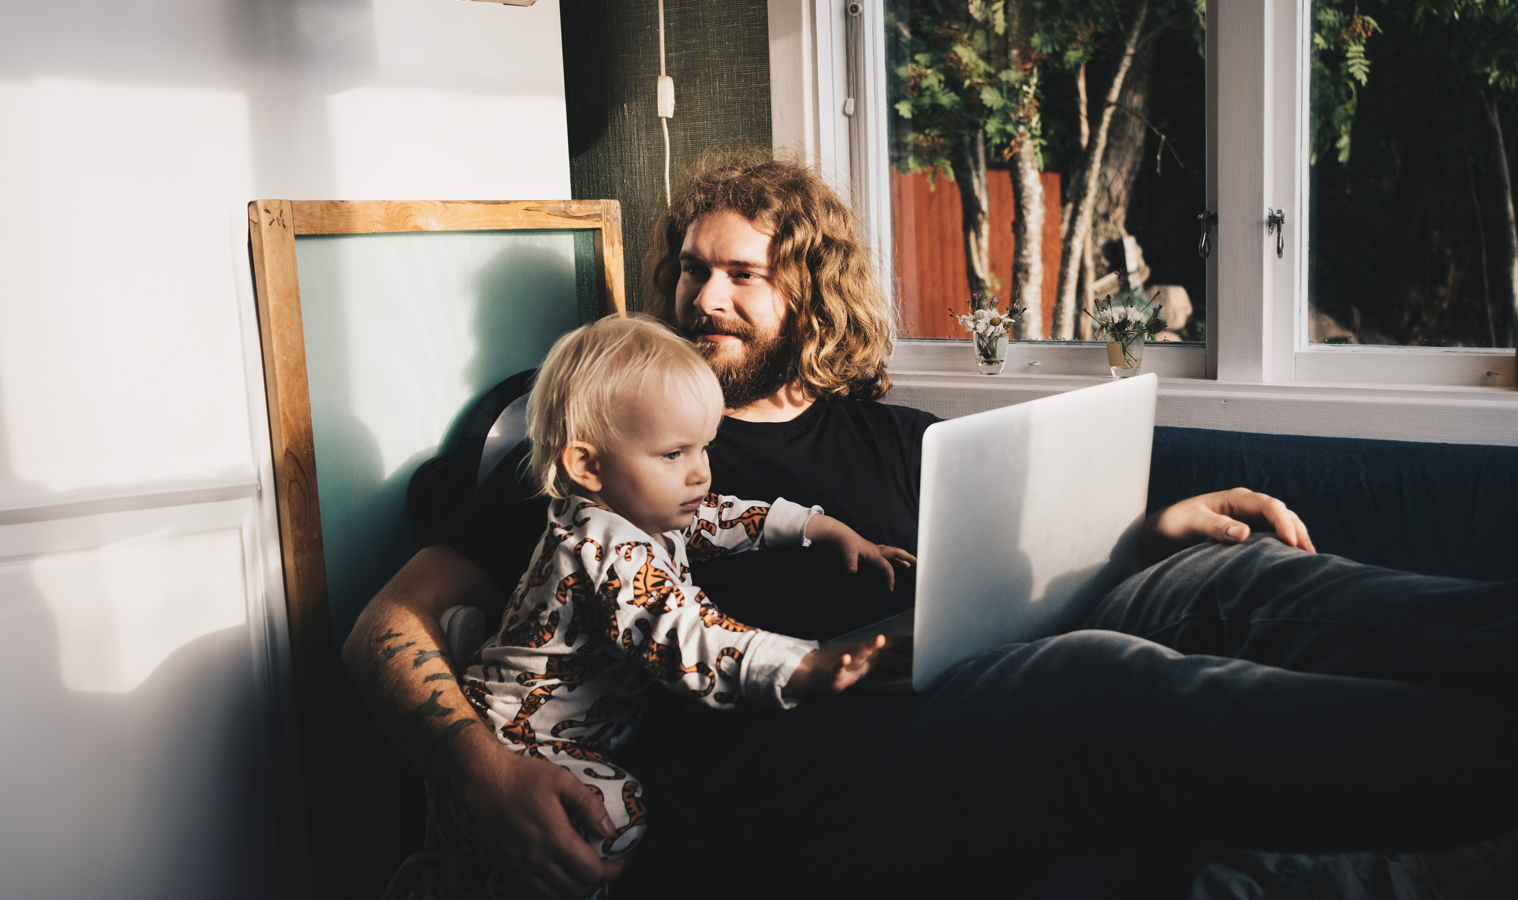 A father sitting on the sofa with his laptop on his lap, and his toddler acting curious